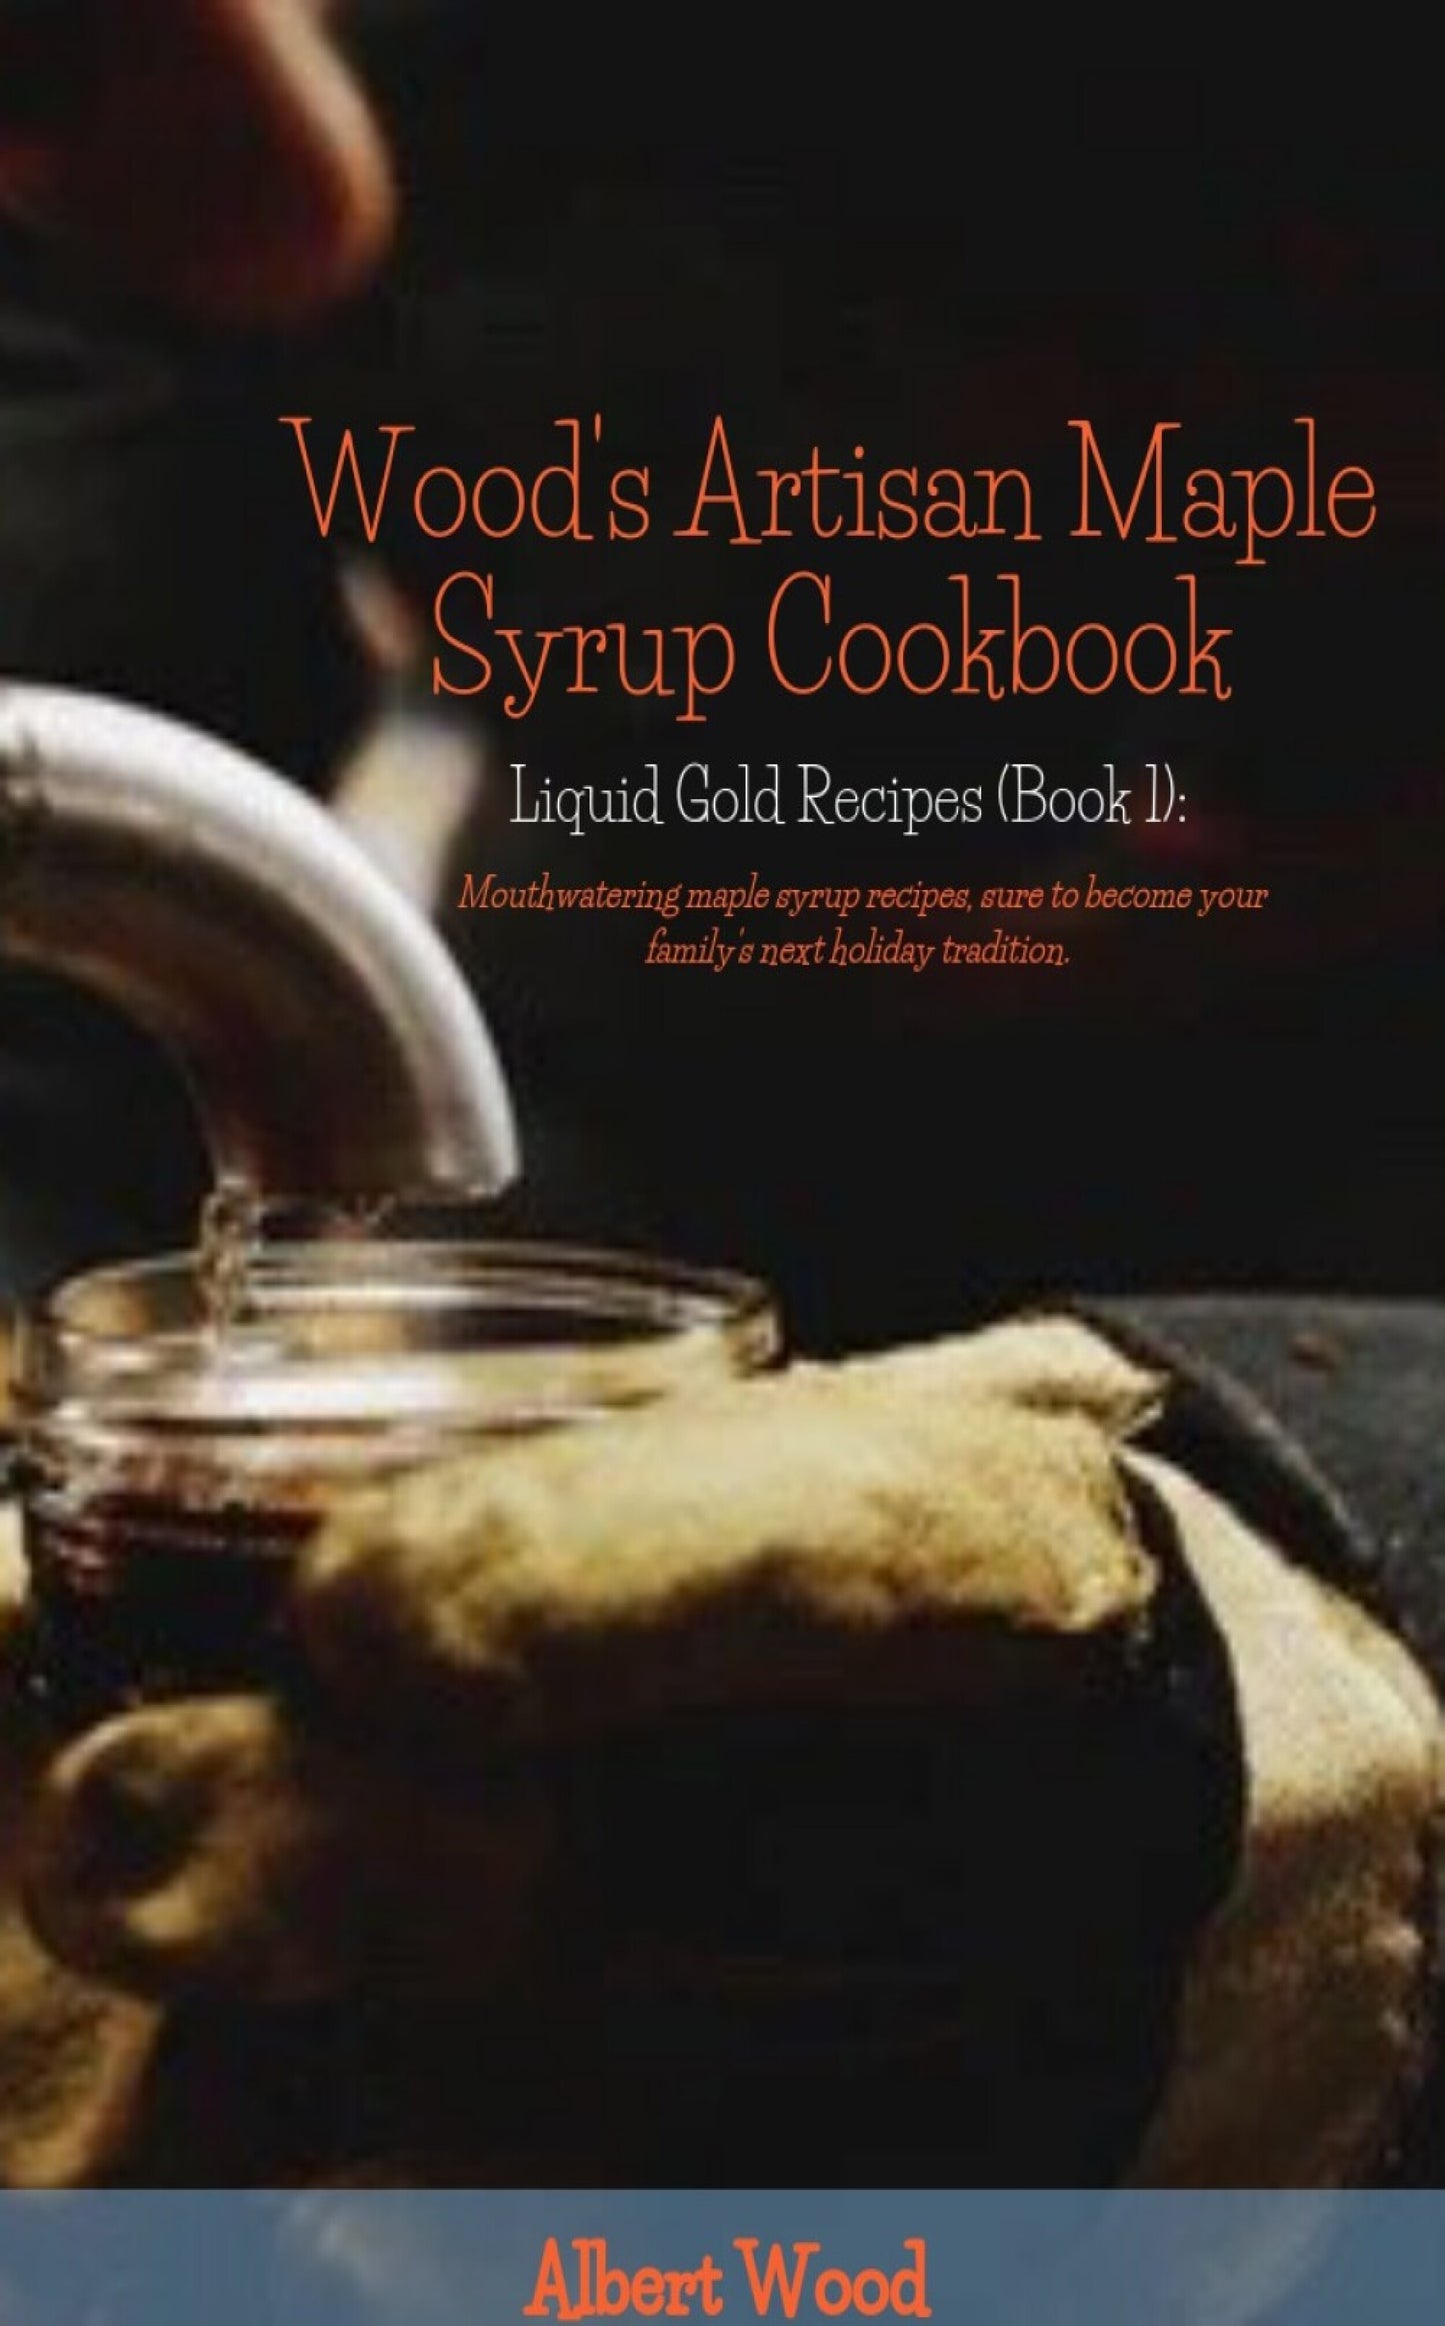 Wood's Artisan Maple Syrup Cookbook (Liquid Gold Recipes Book 1)